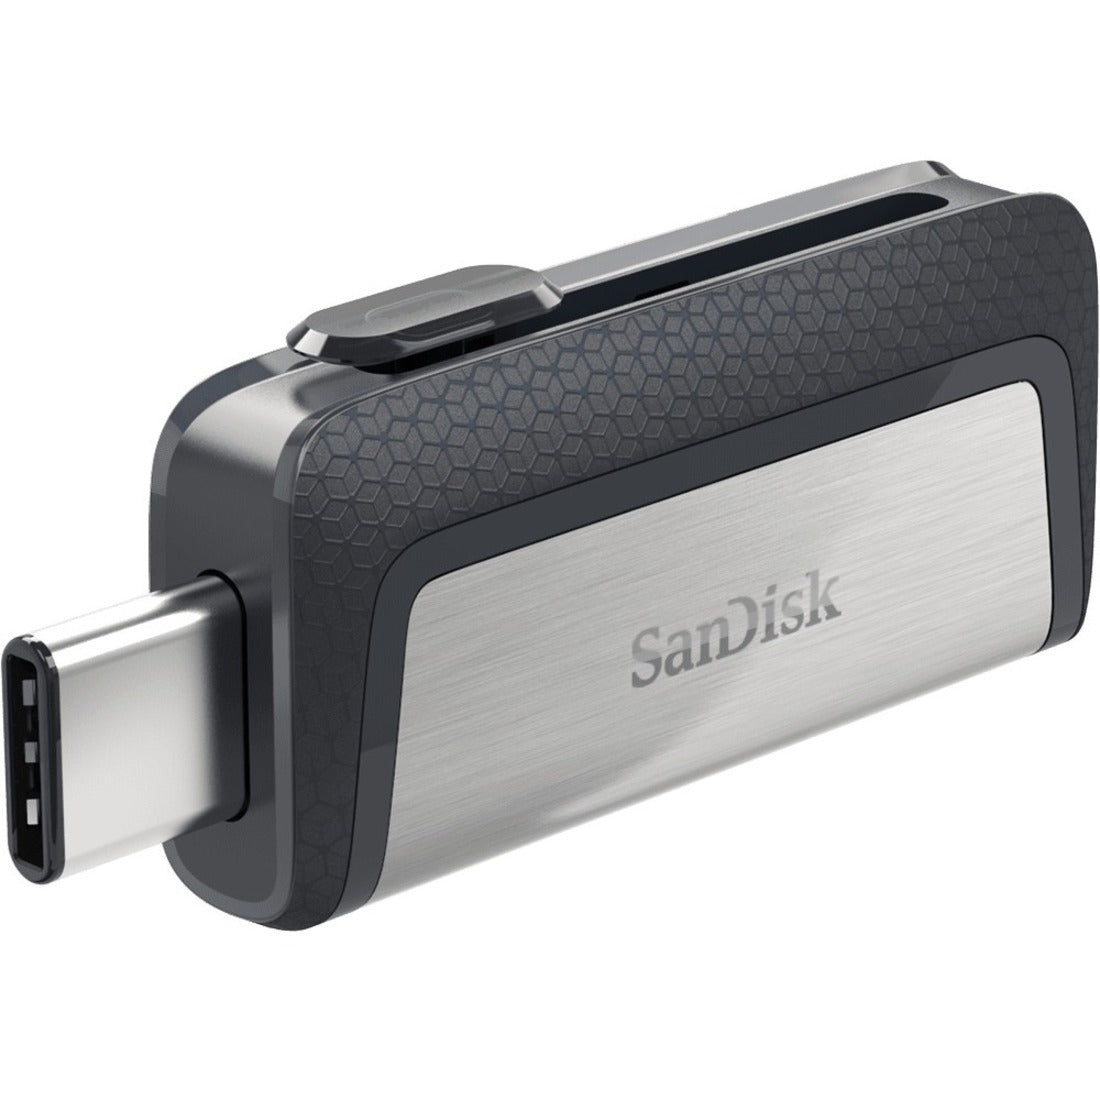 SanDisk SDDDC2-032G-A46 Ultra Dual Drive USB TYPE-C - 32GB, High-Speed Data Transfer and Easy File Management